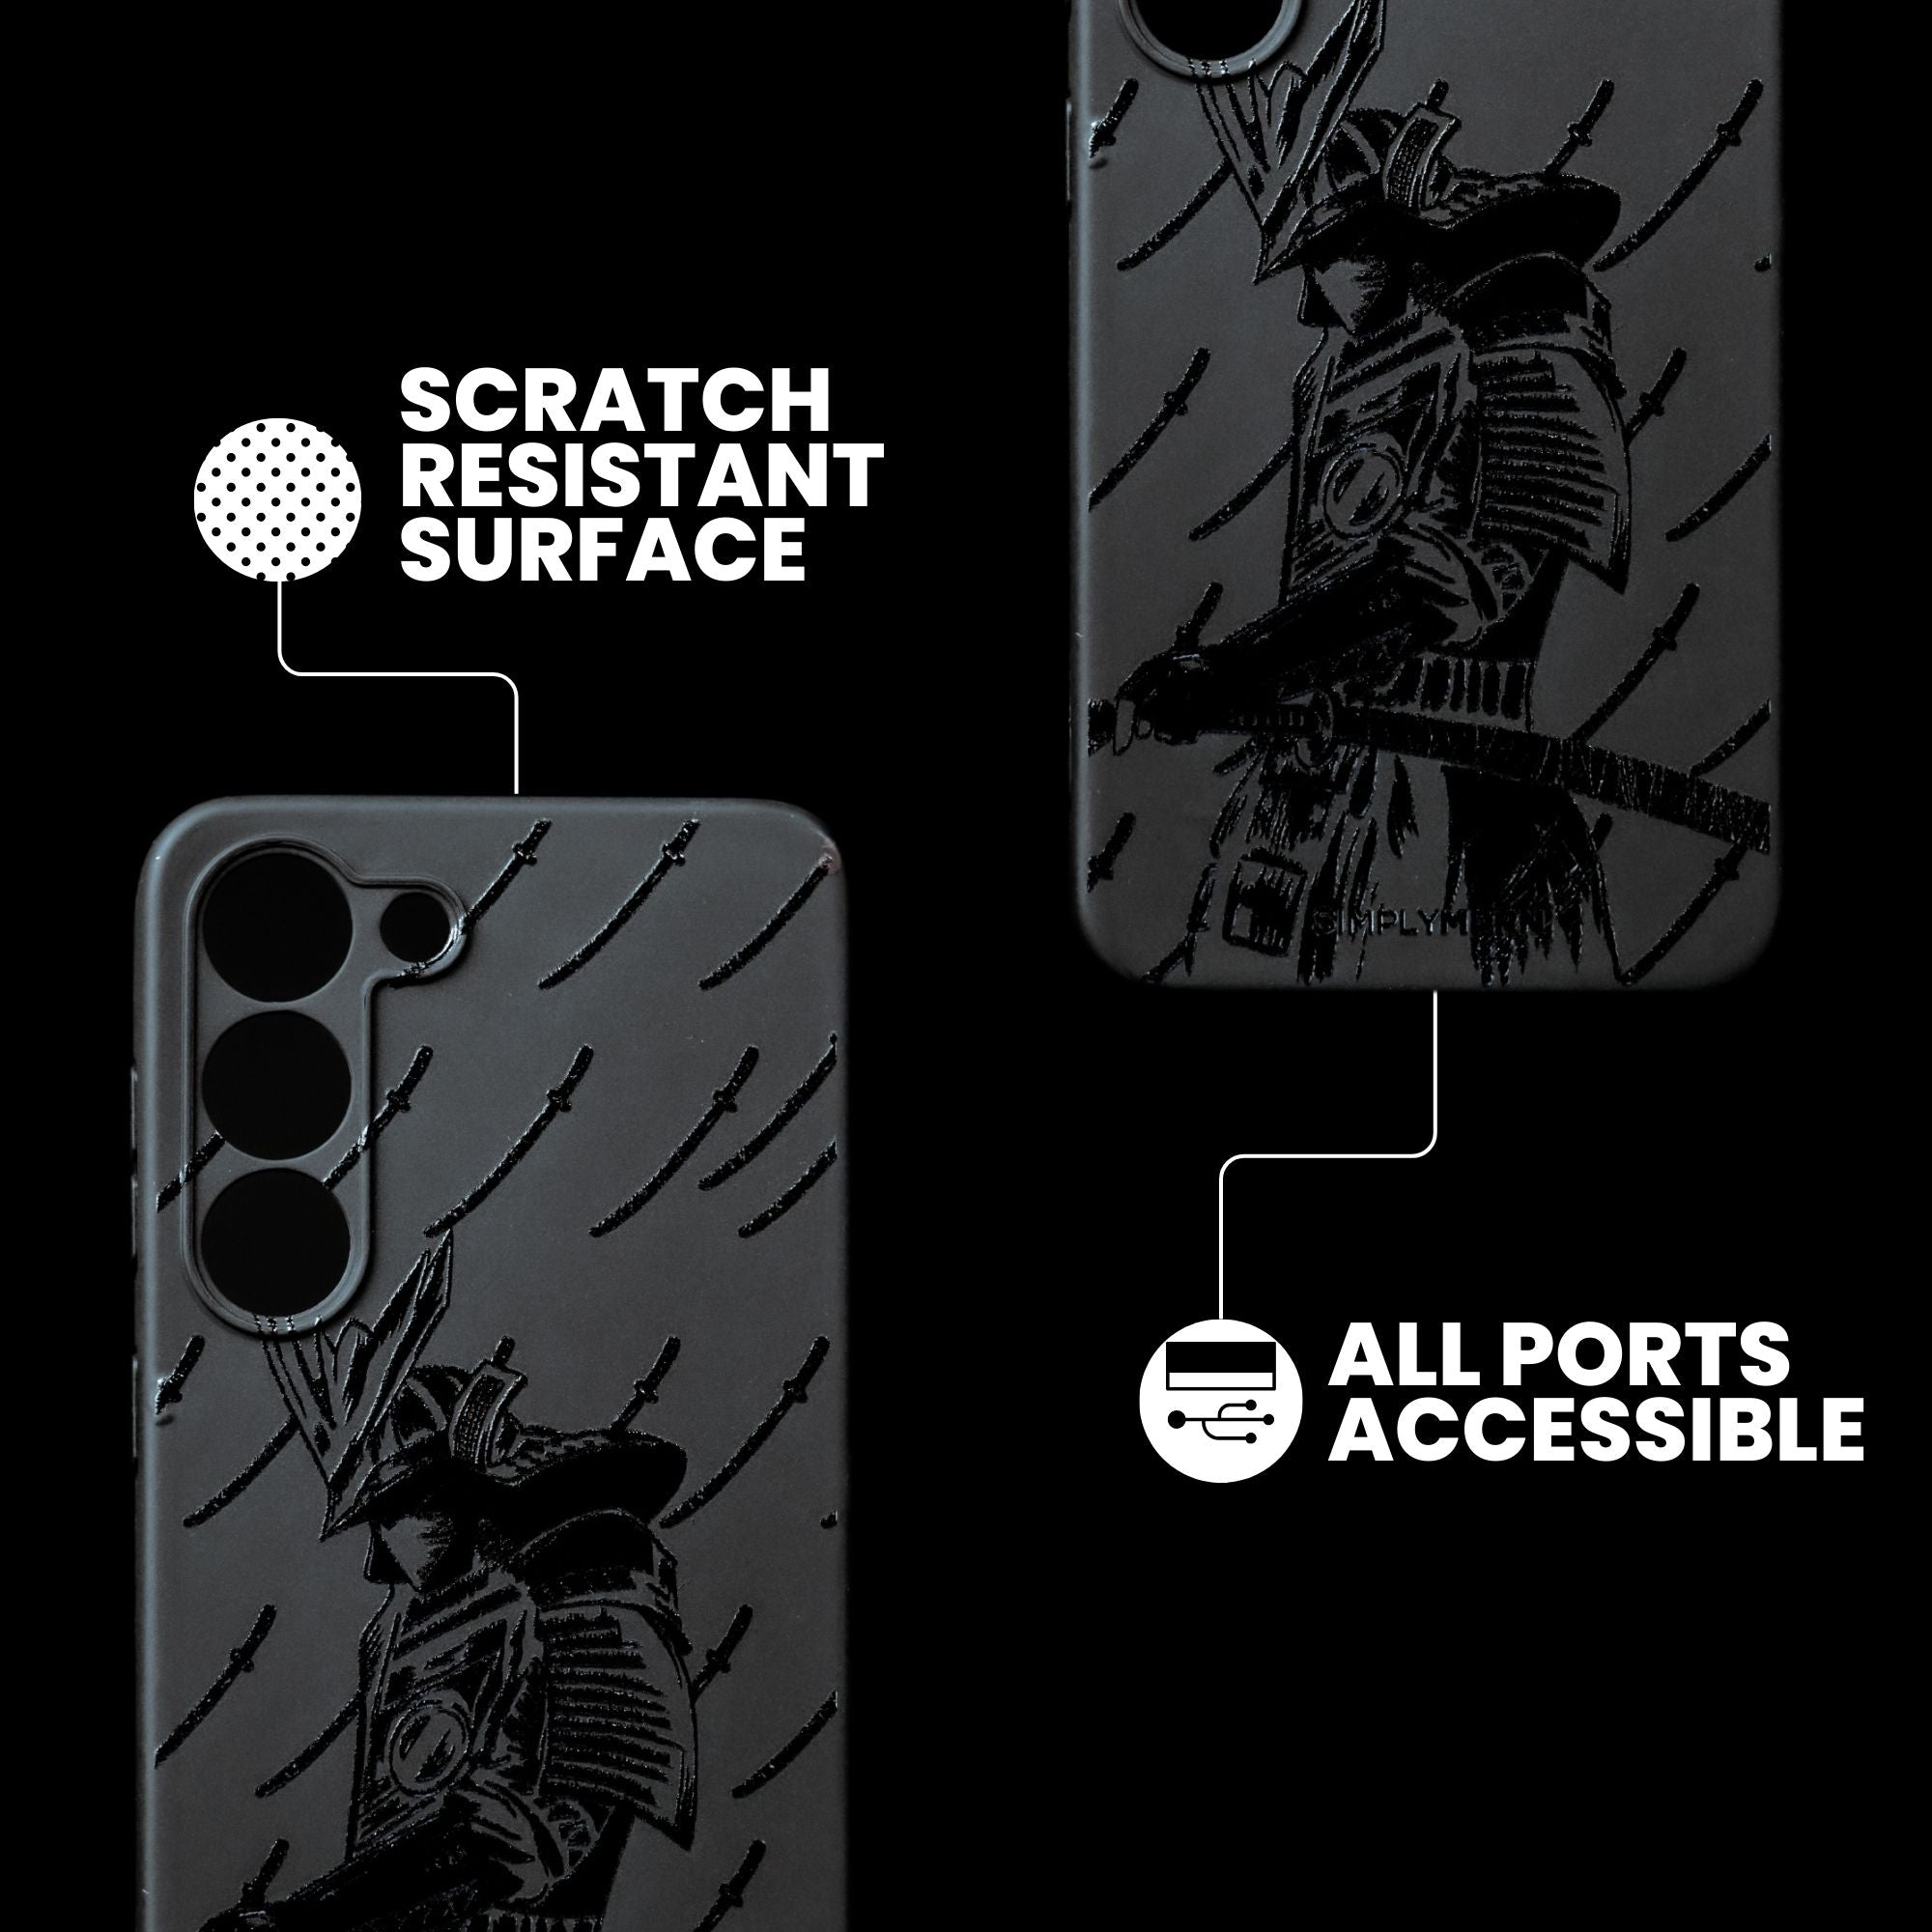 RONIN Slim Android Phone Case